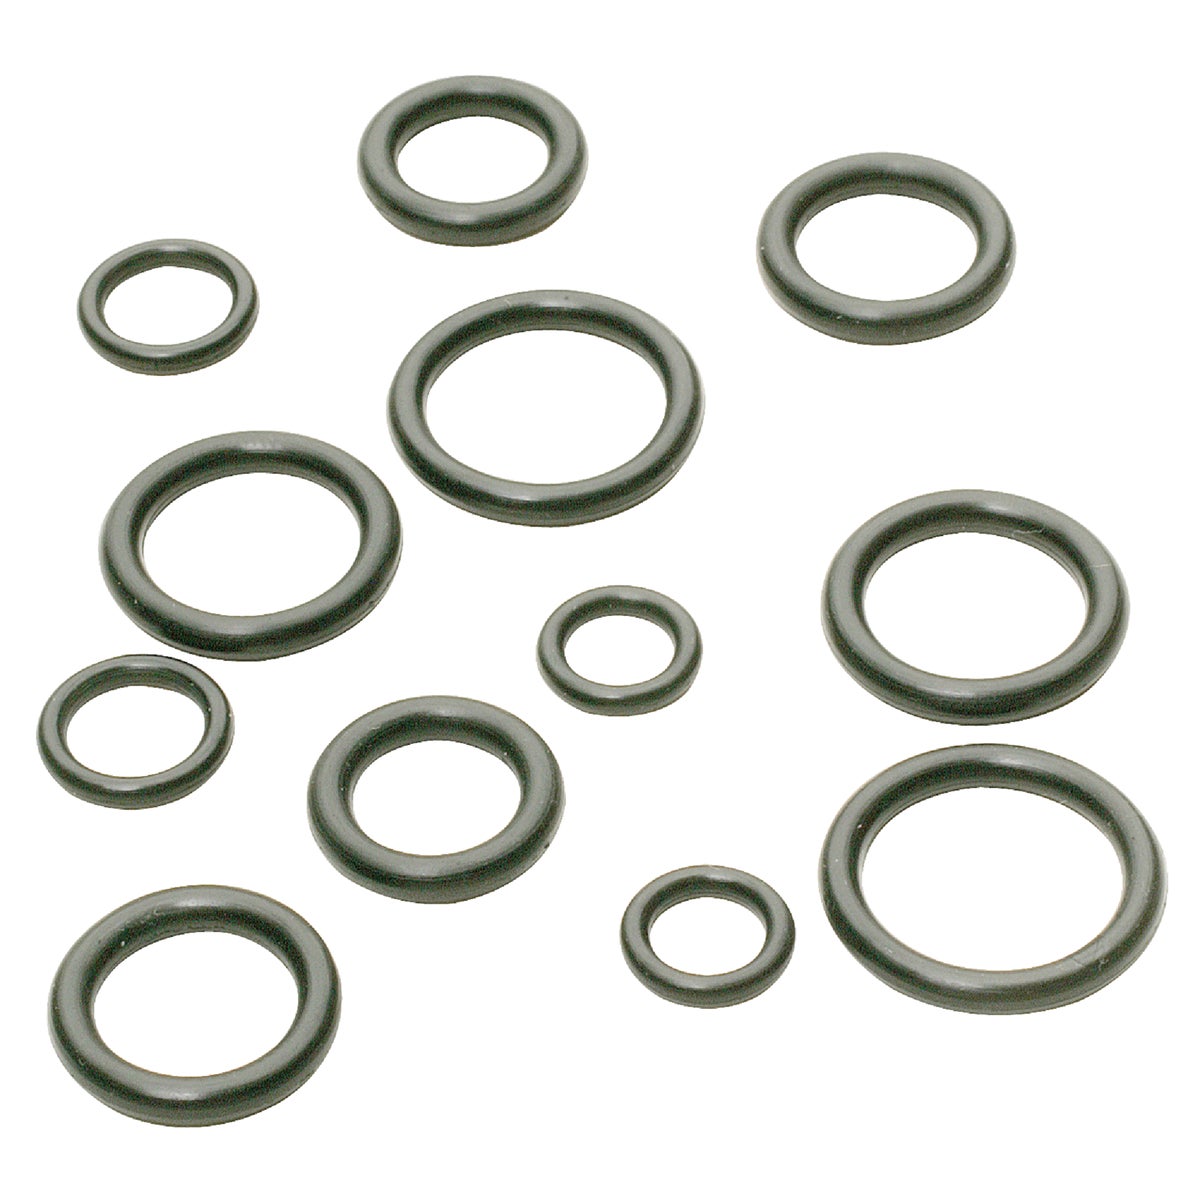 Item 402317, Assorted O-rings, each set contains 6 most popular sizes (2 of each).